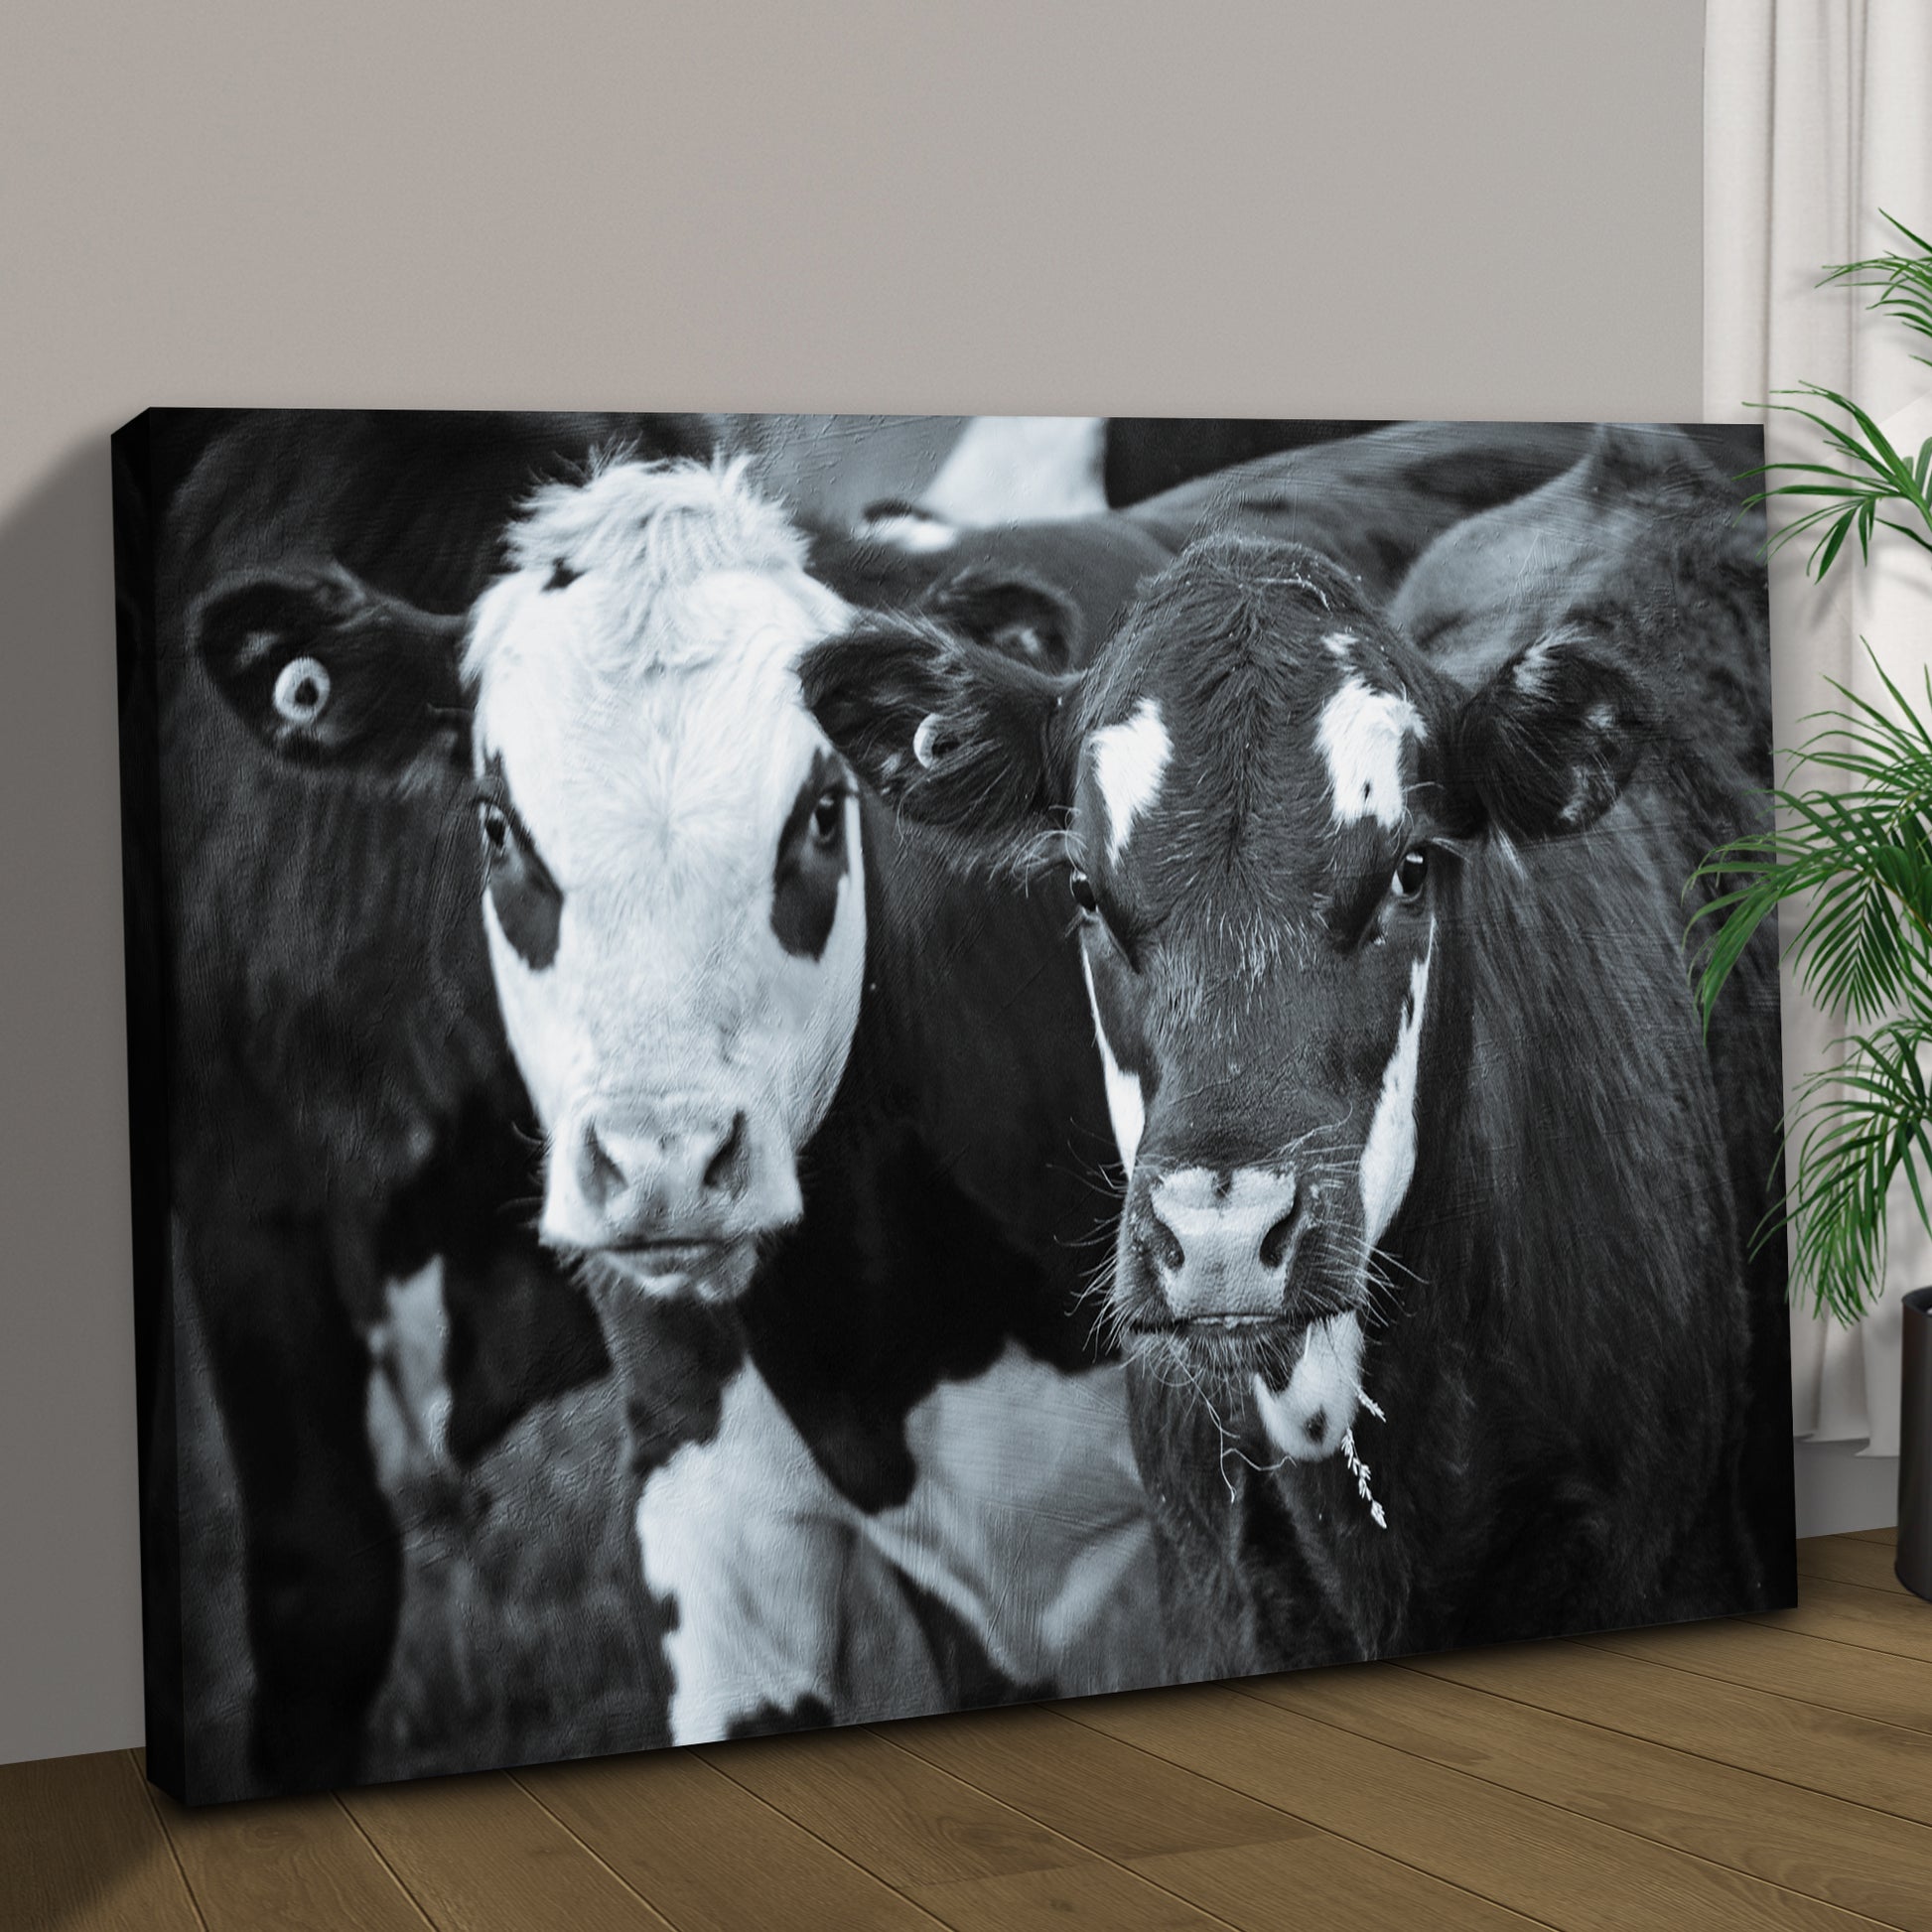 Black And White Cows Canvas Wall Art Style 1 - Image by Tailored Canvases